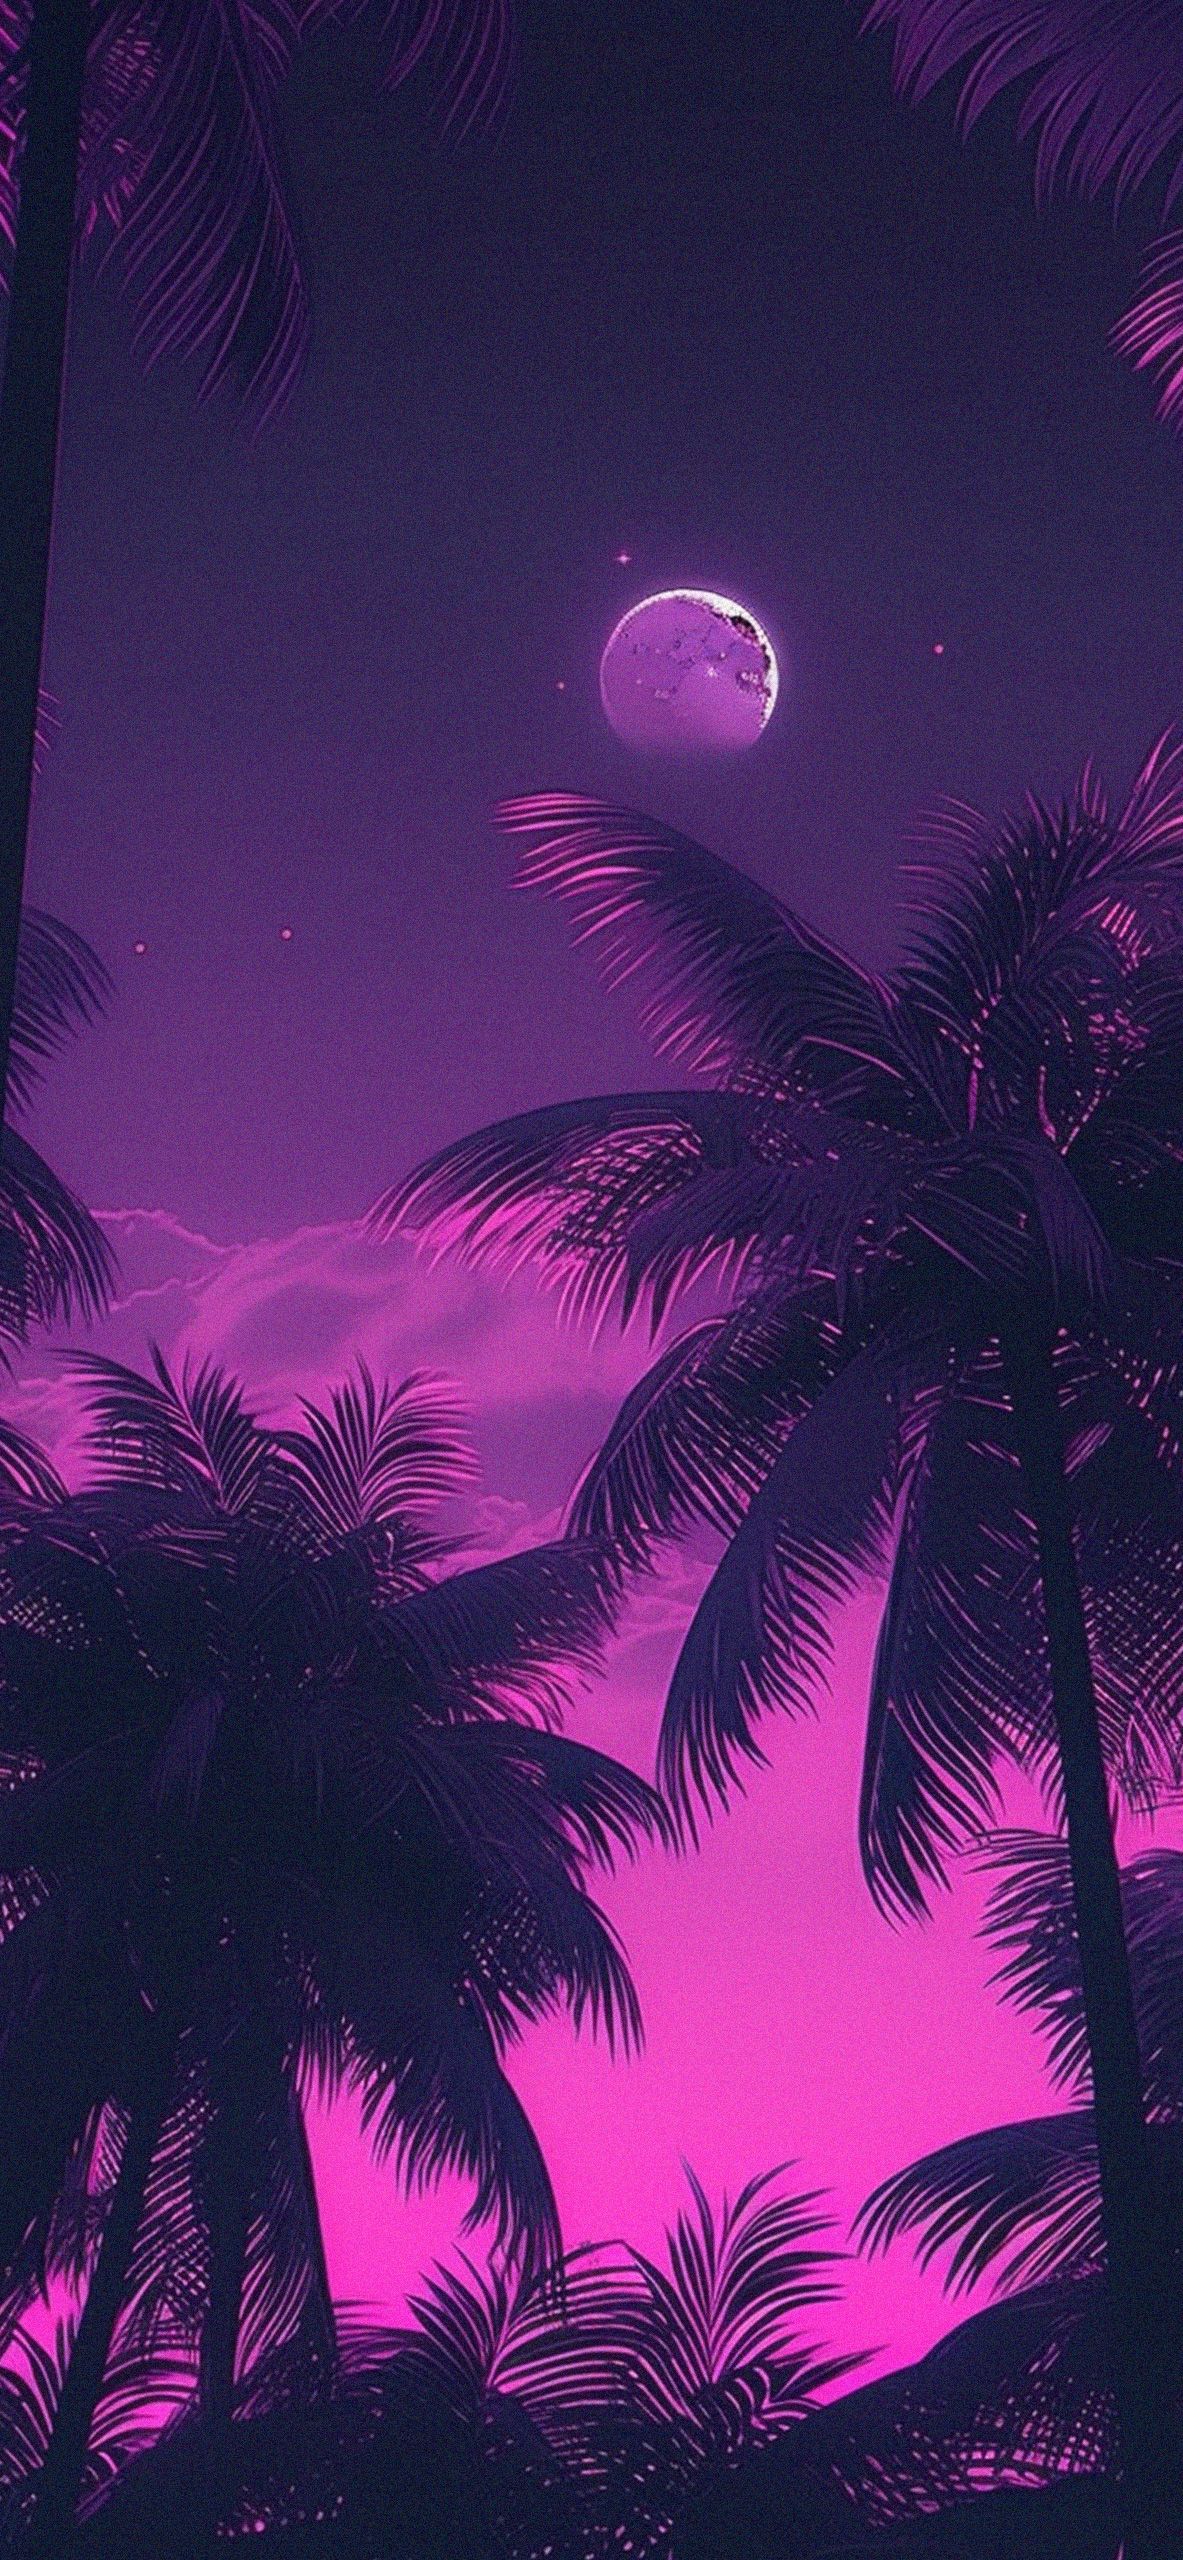 Aesthetic purple palm trees wallpaper for your iPhone X from the ... - Purple, moon, violet, light purple